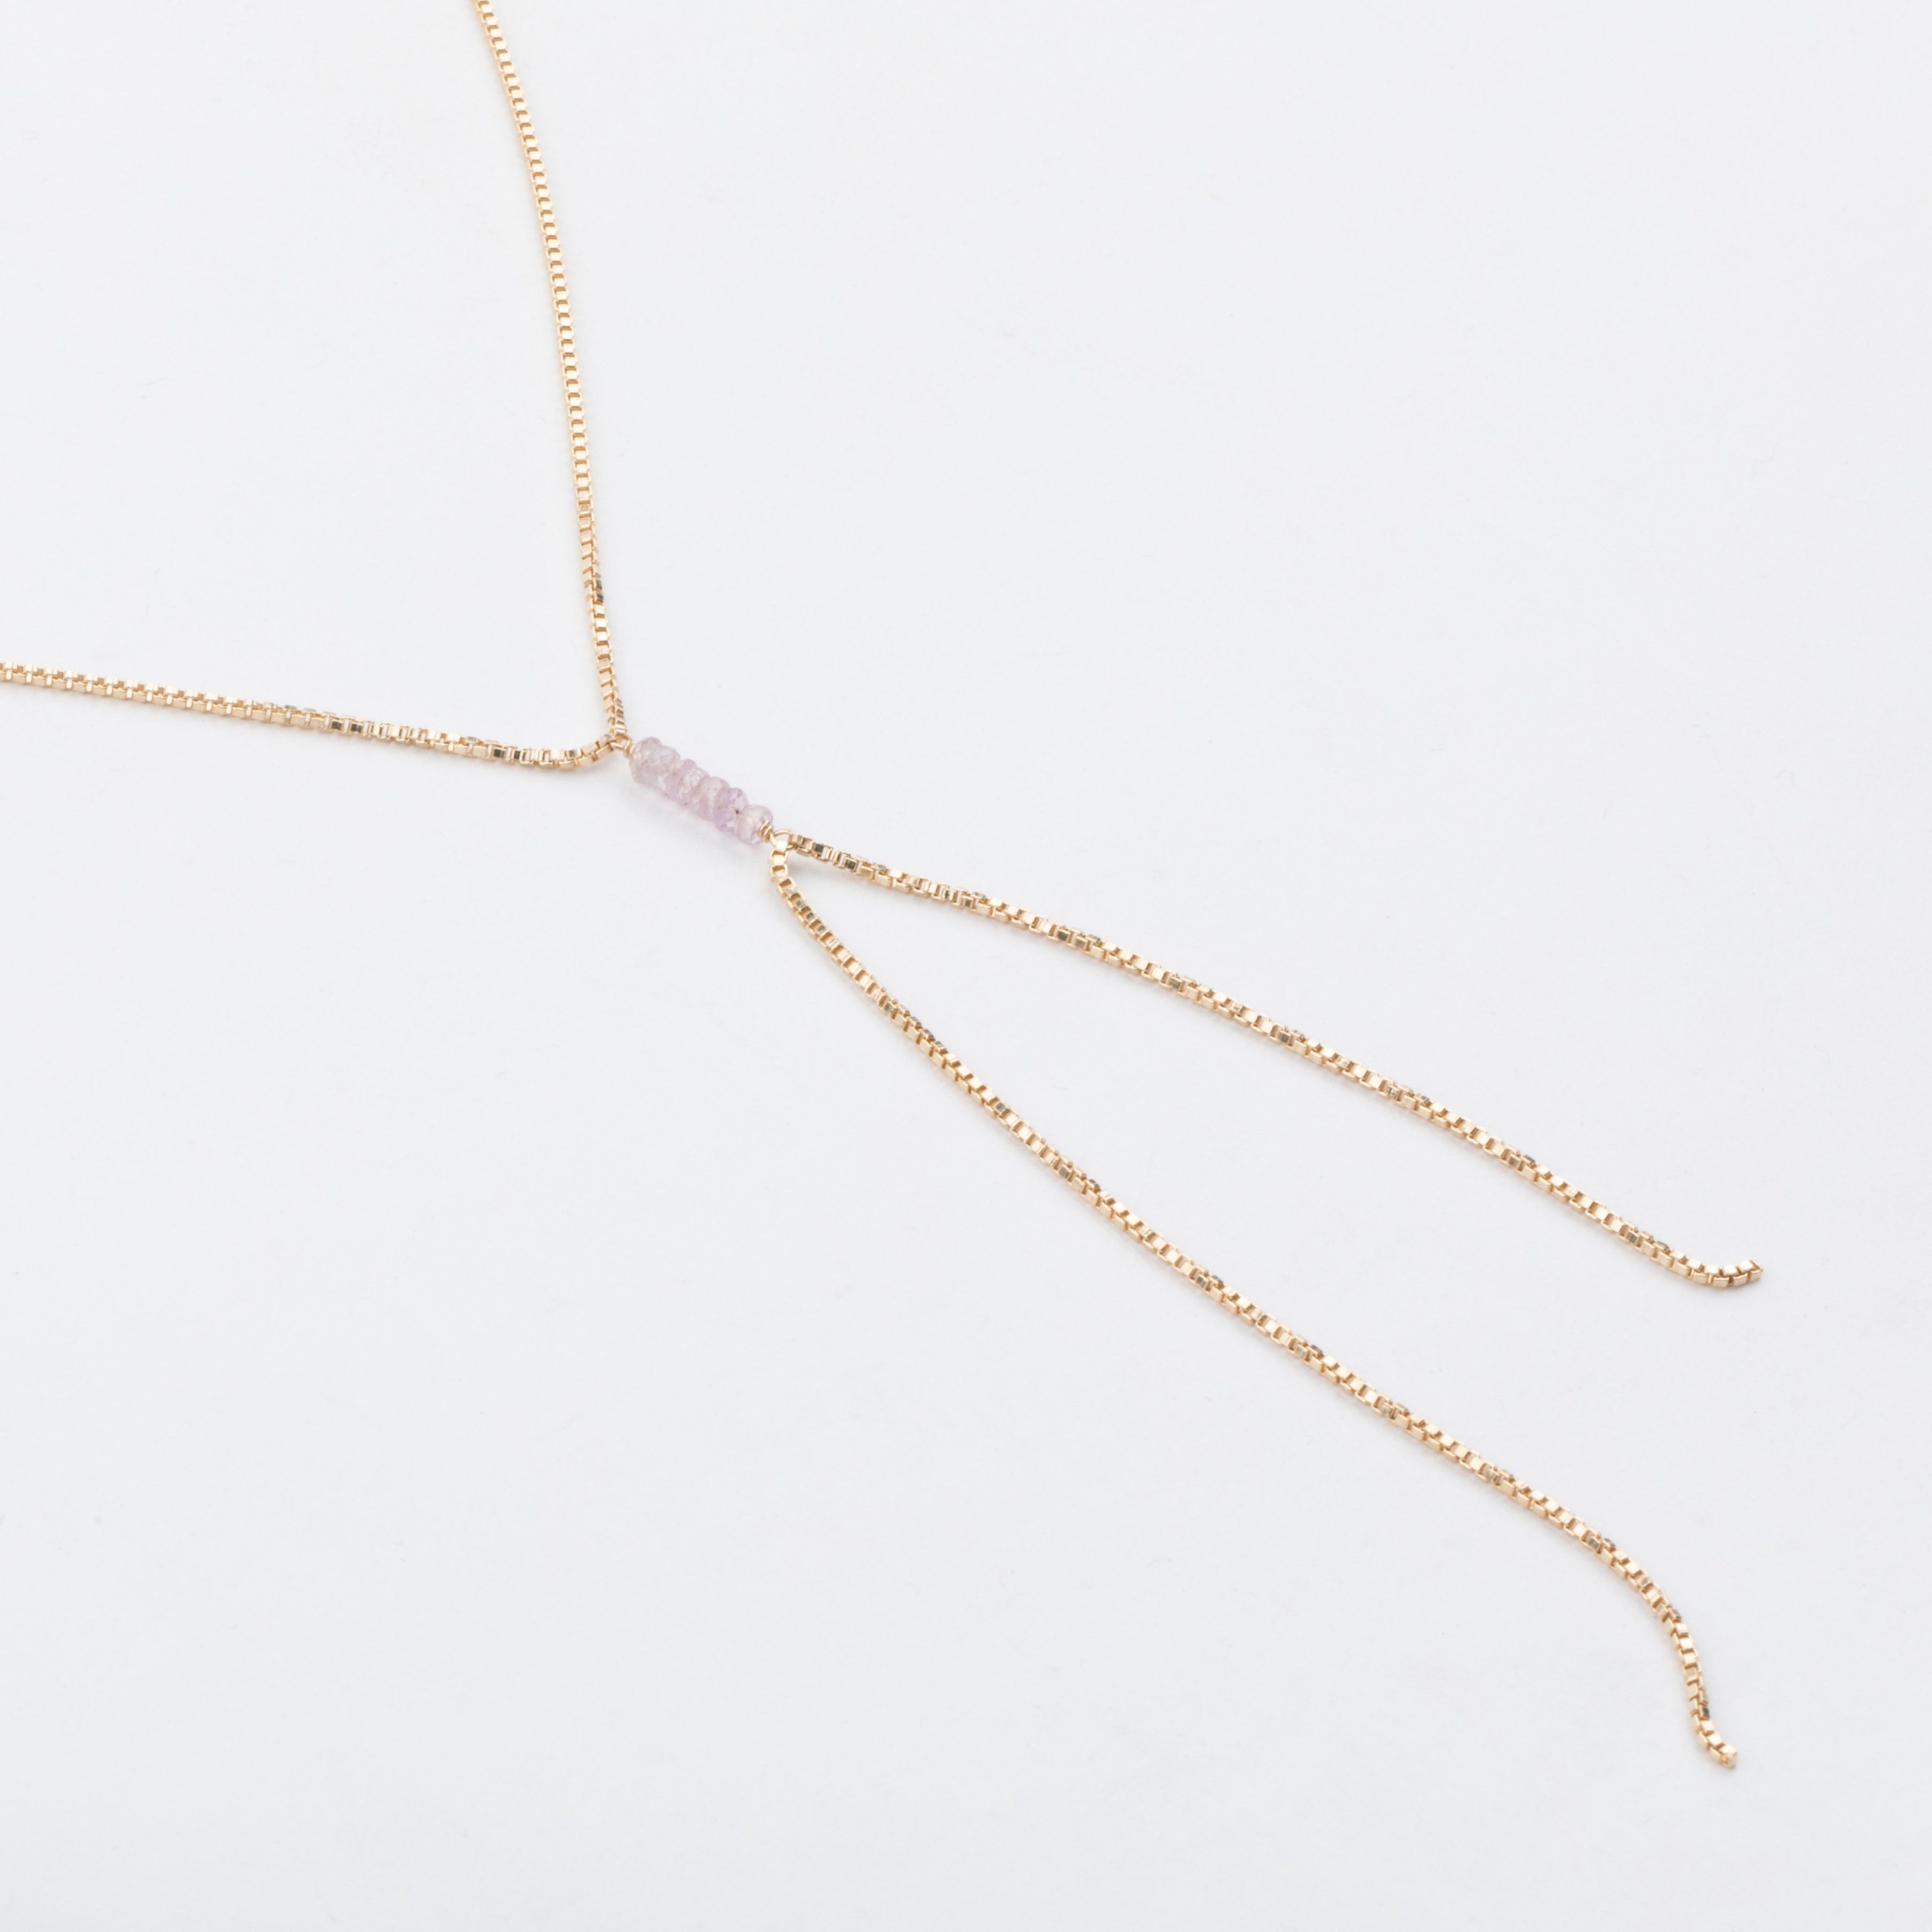 Bonbon Pink Sapphire Necklace In 2019 | Necklace | Sapphire Intended For Latest Lariat Pink Sapphire And Diamond Necklaces (View 9 of 25)